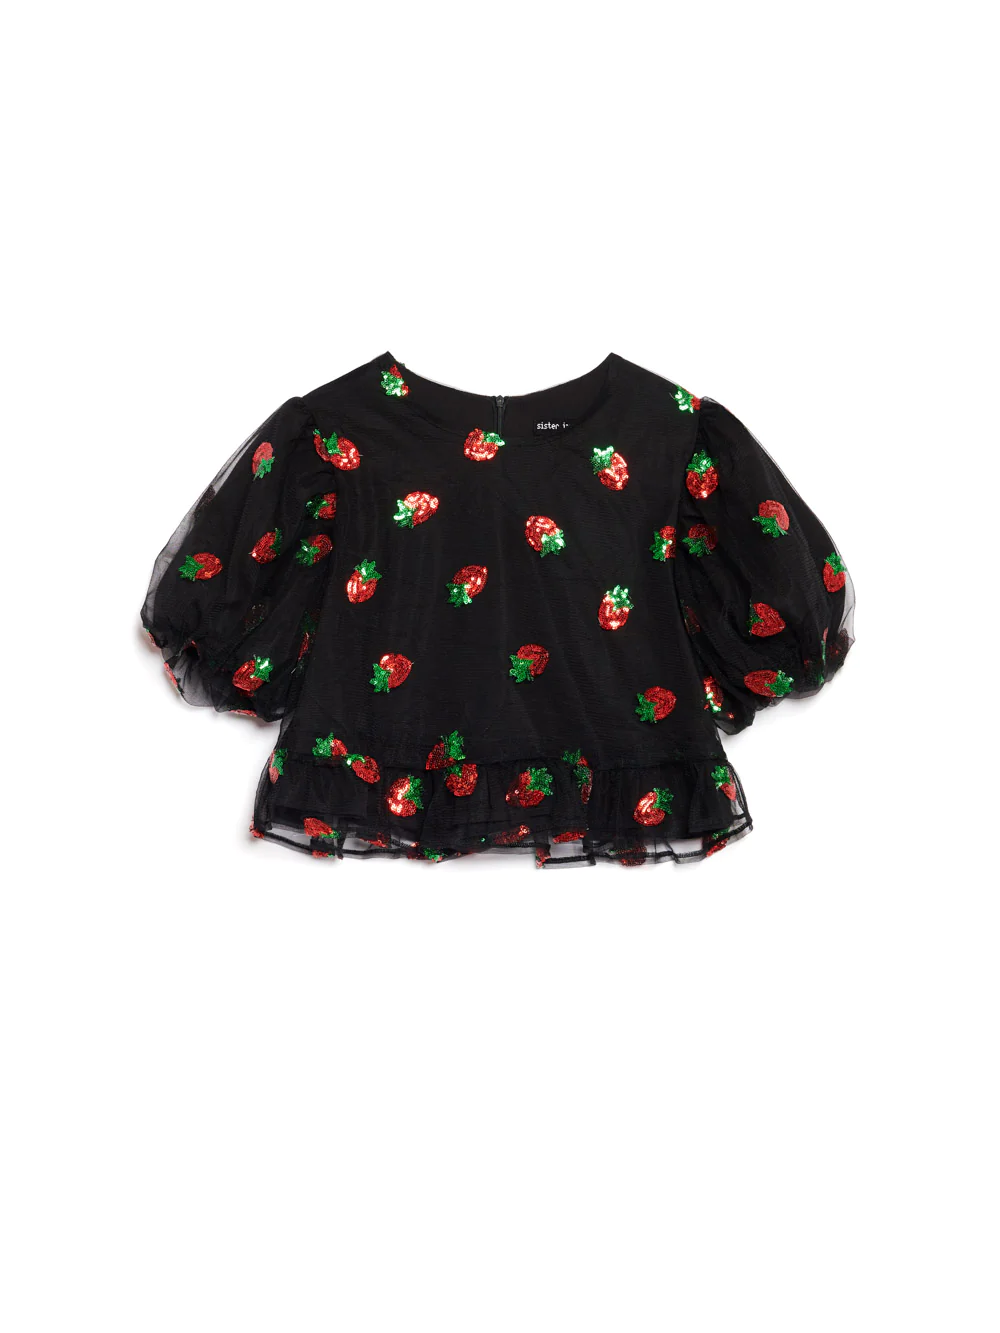 Sister Jane Strawberry Sequin Top